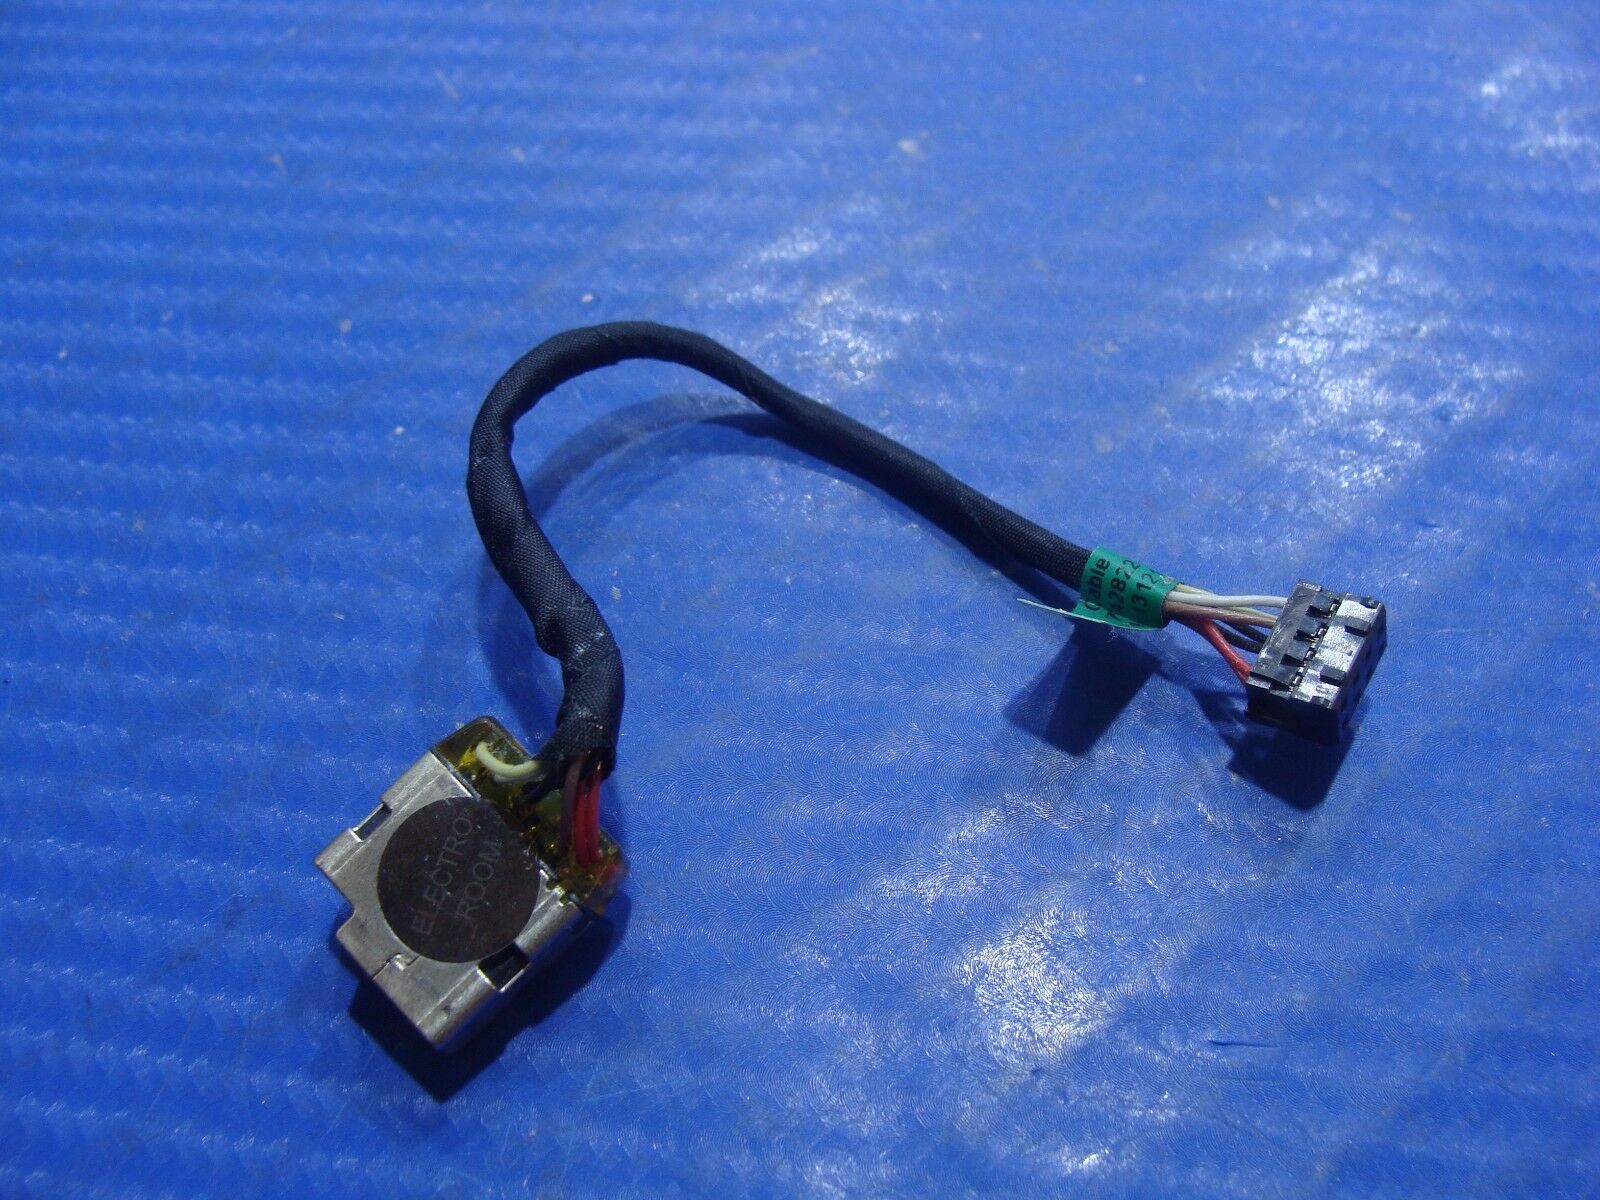 HP 15-d035dx 15.6" Genuine Laptop DC IN Power Jack with Cable 742822-FD1 HP